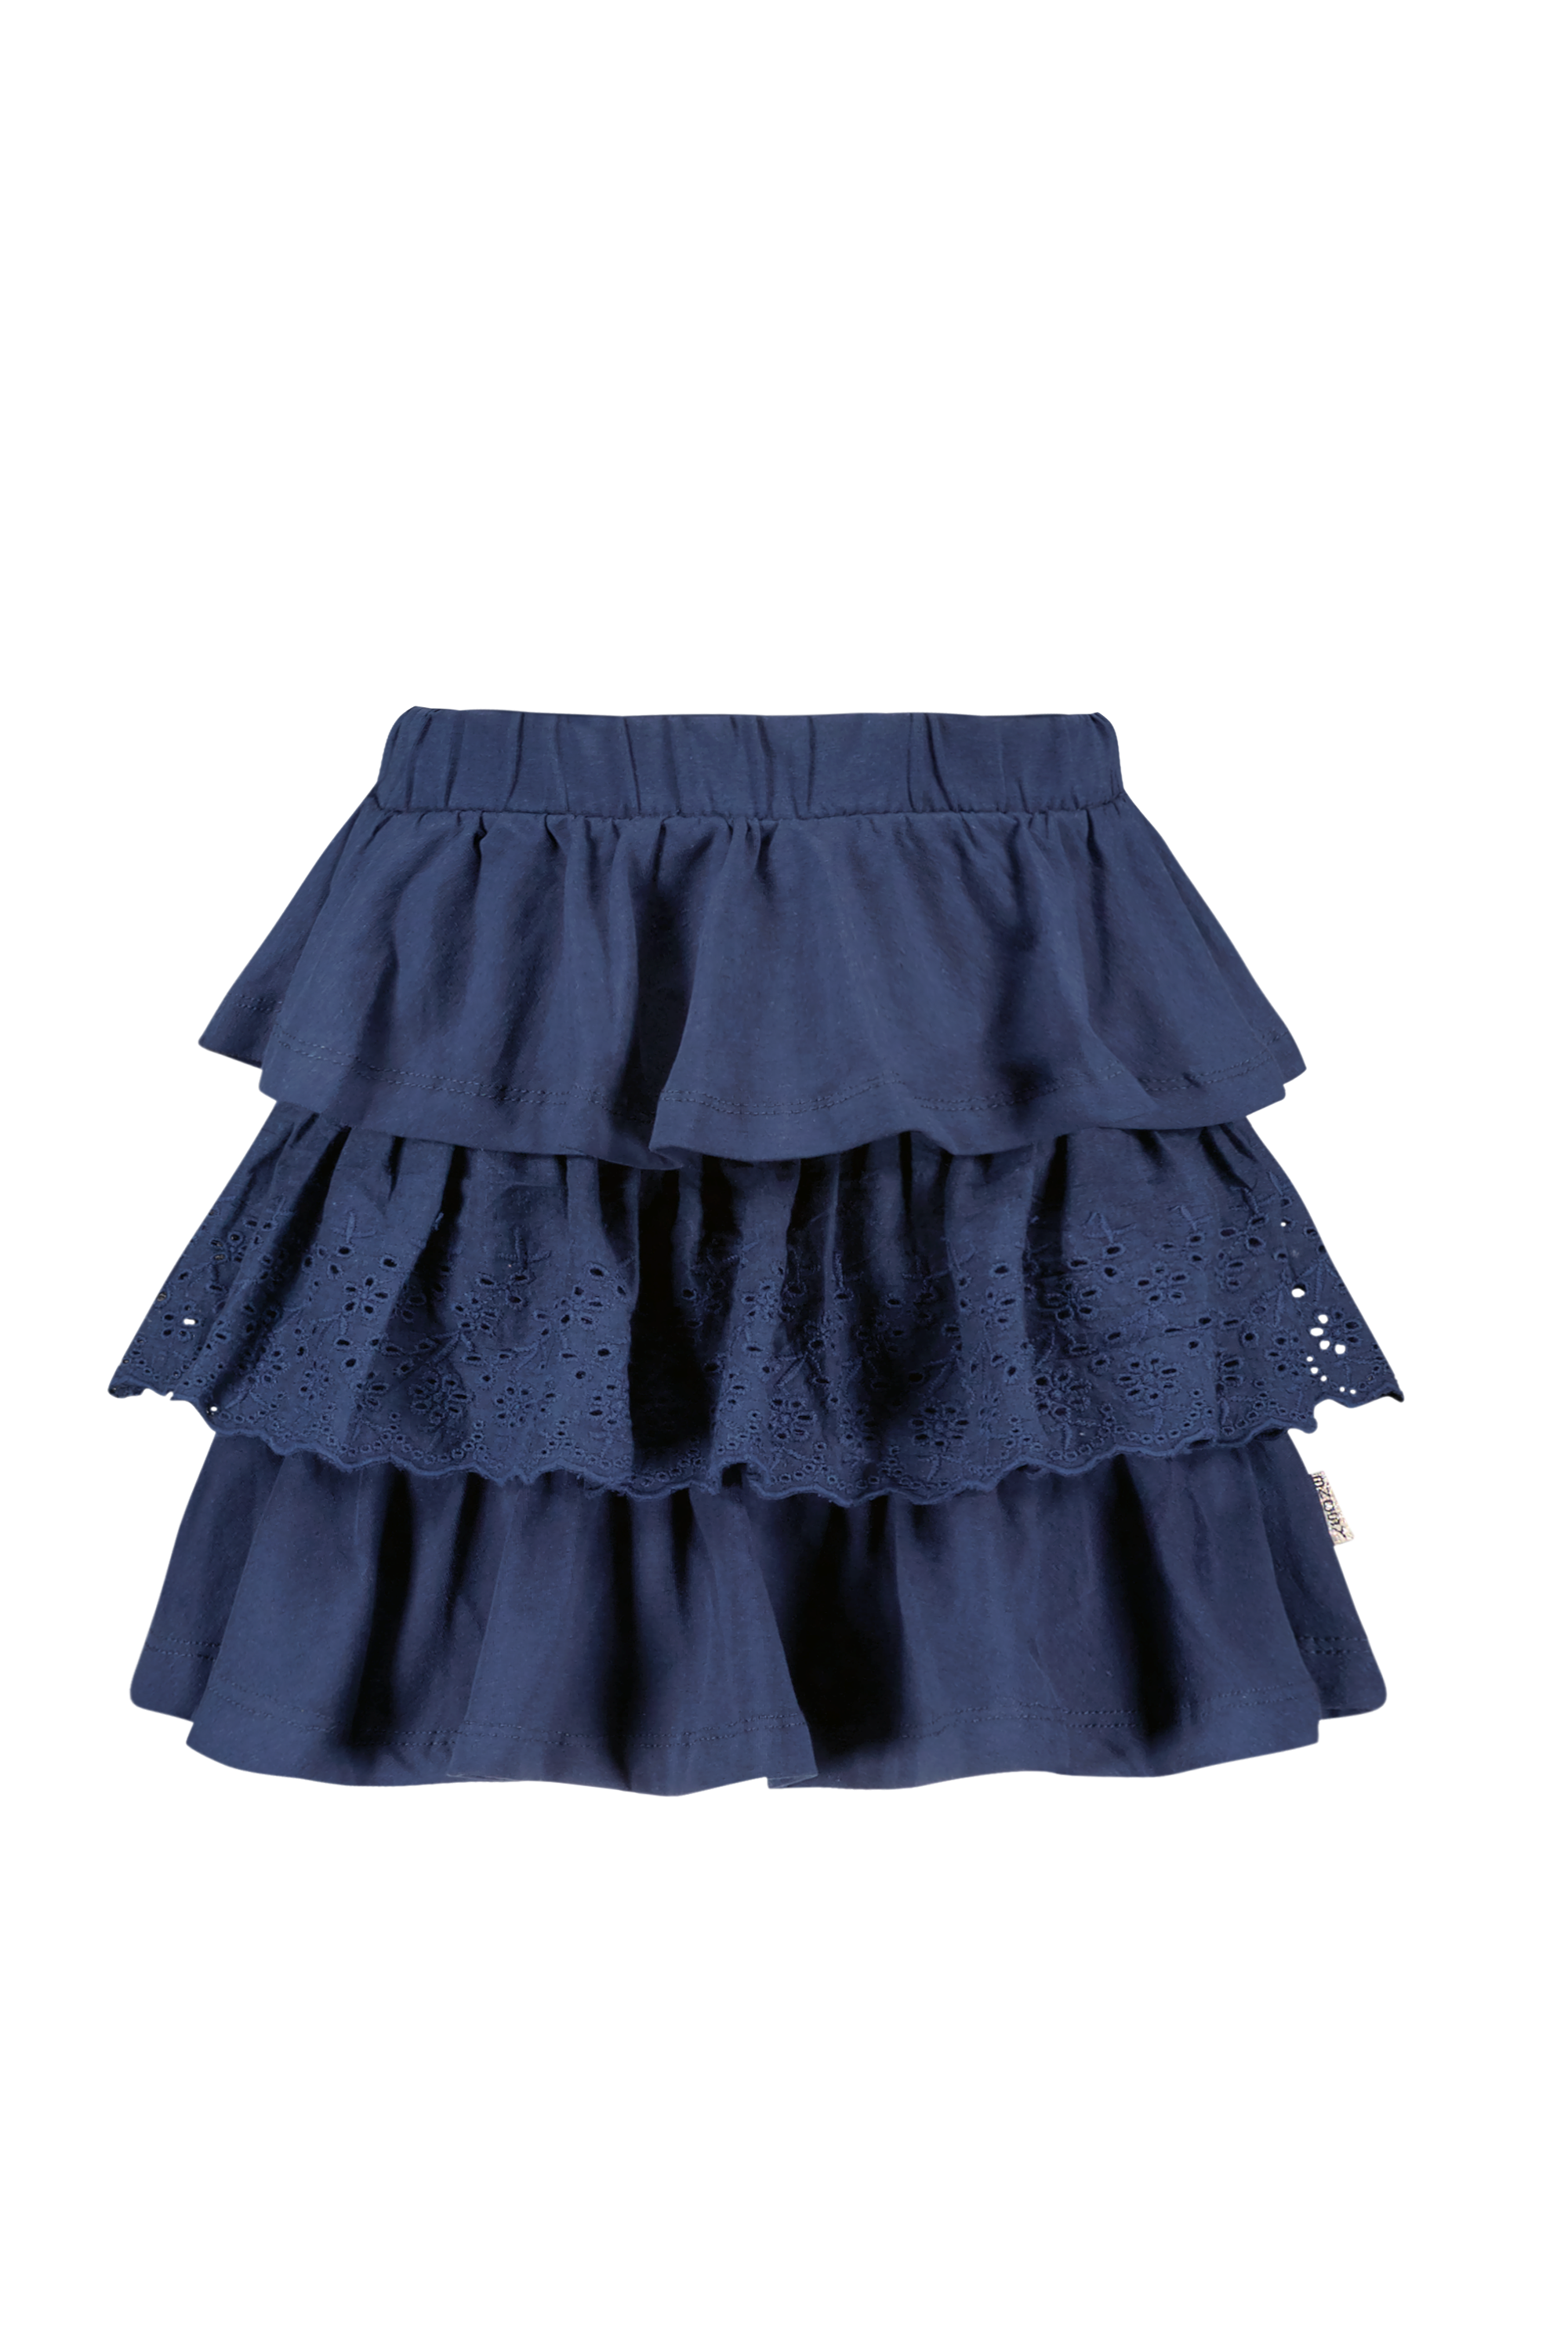 Rok Girls 3 layer skirt. w/ 2nd layer embroidery lace fabric